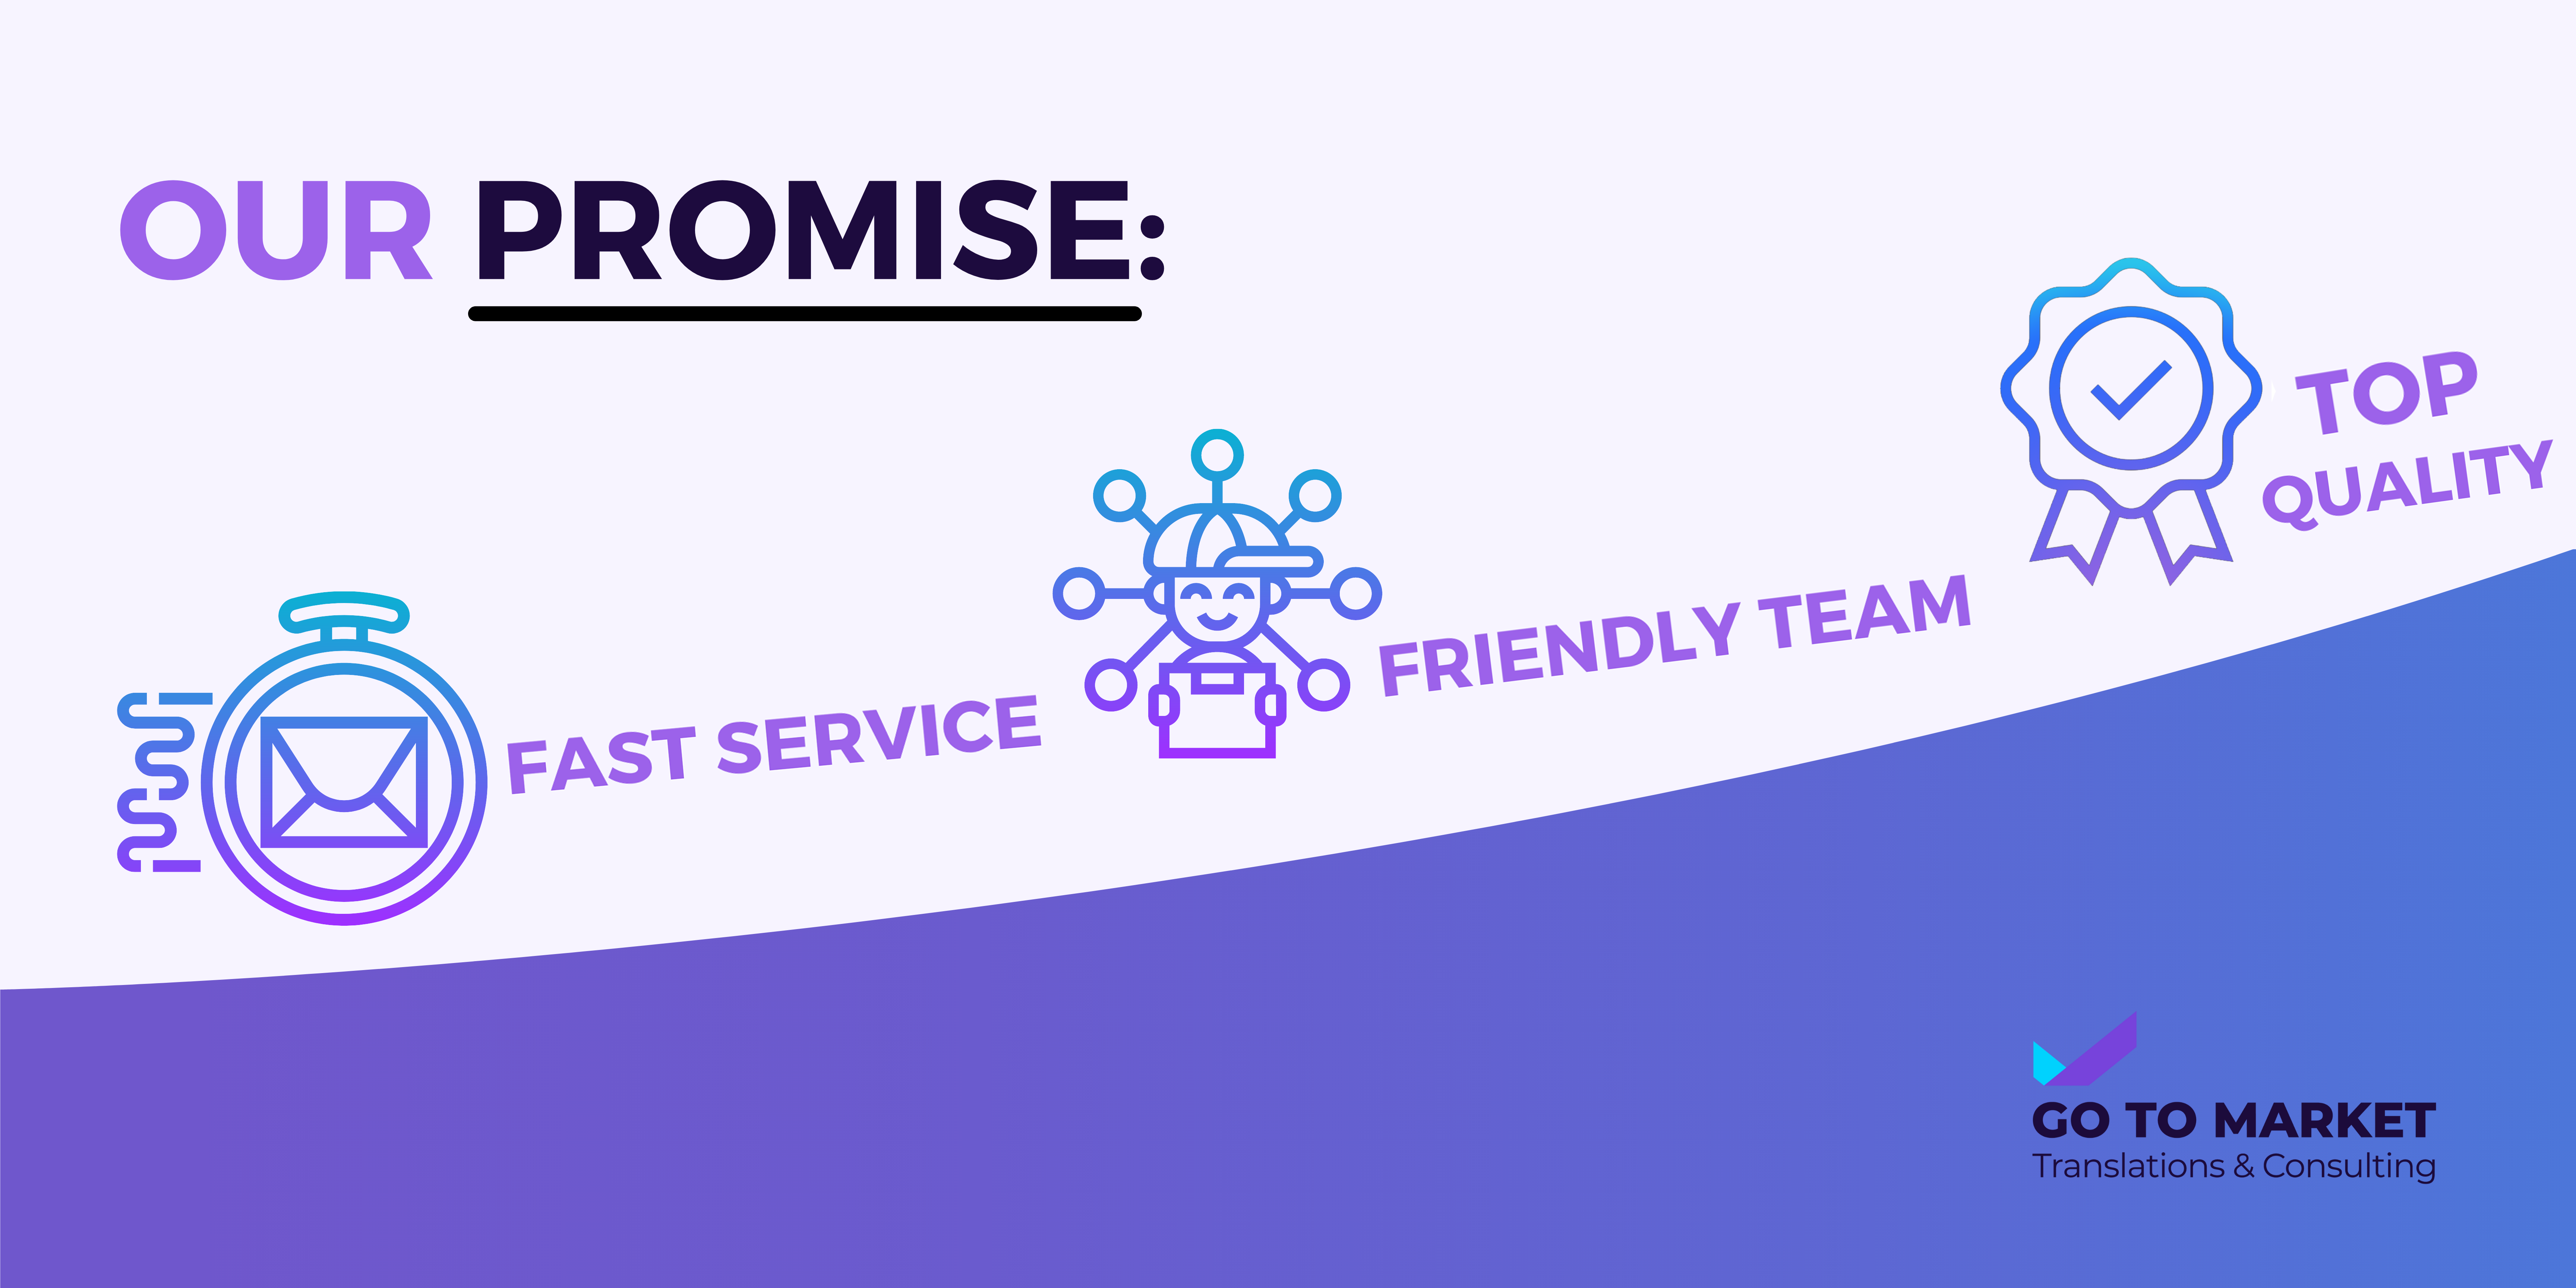 OUR PROMISE: FAST SERVICE, FRIENDLY TEAM, TOP QUALITY. Go to Market - Translations & Consulting. Expert Shopify Translation Agency.